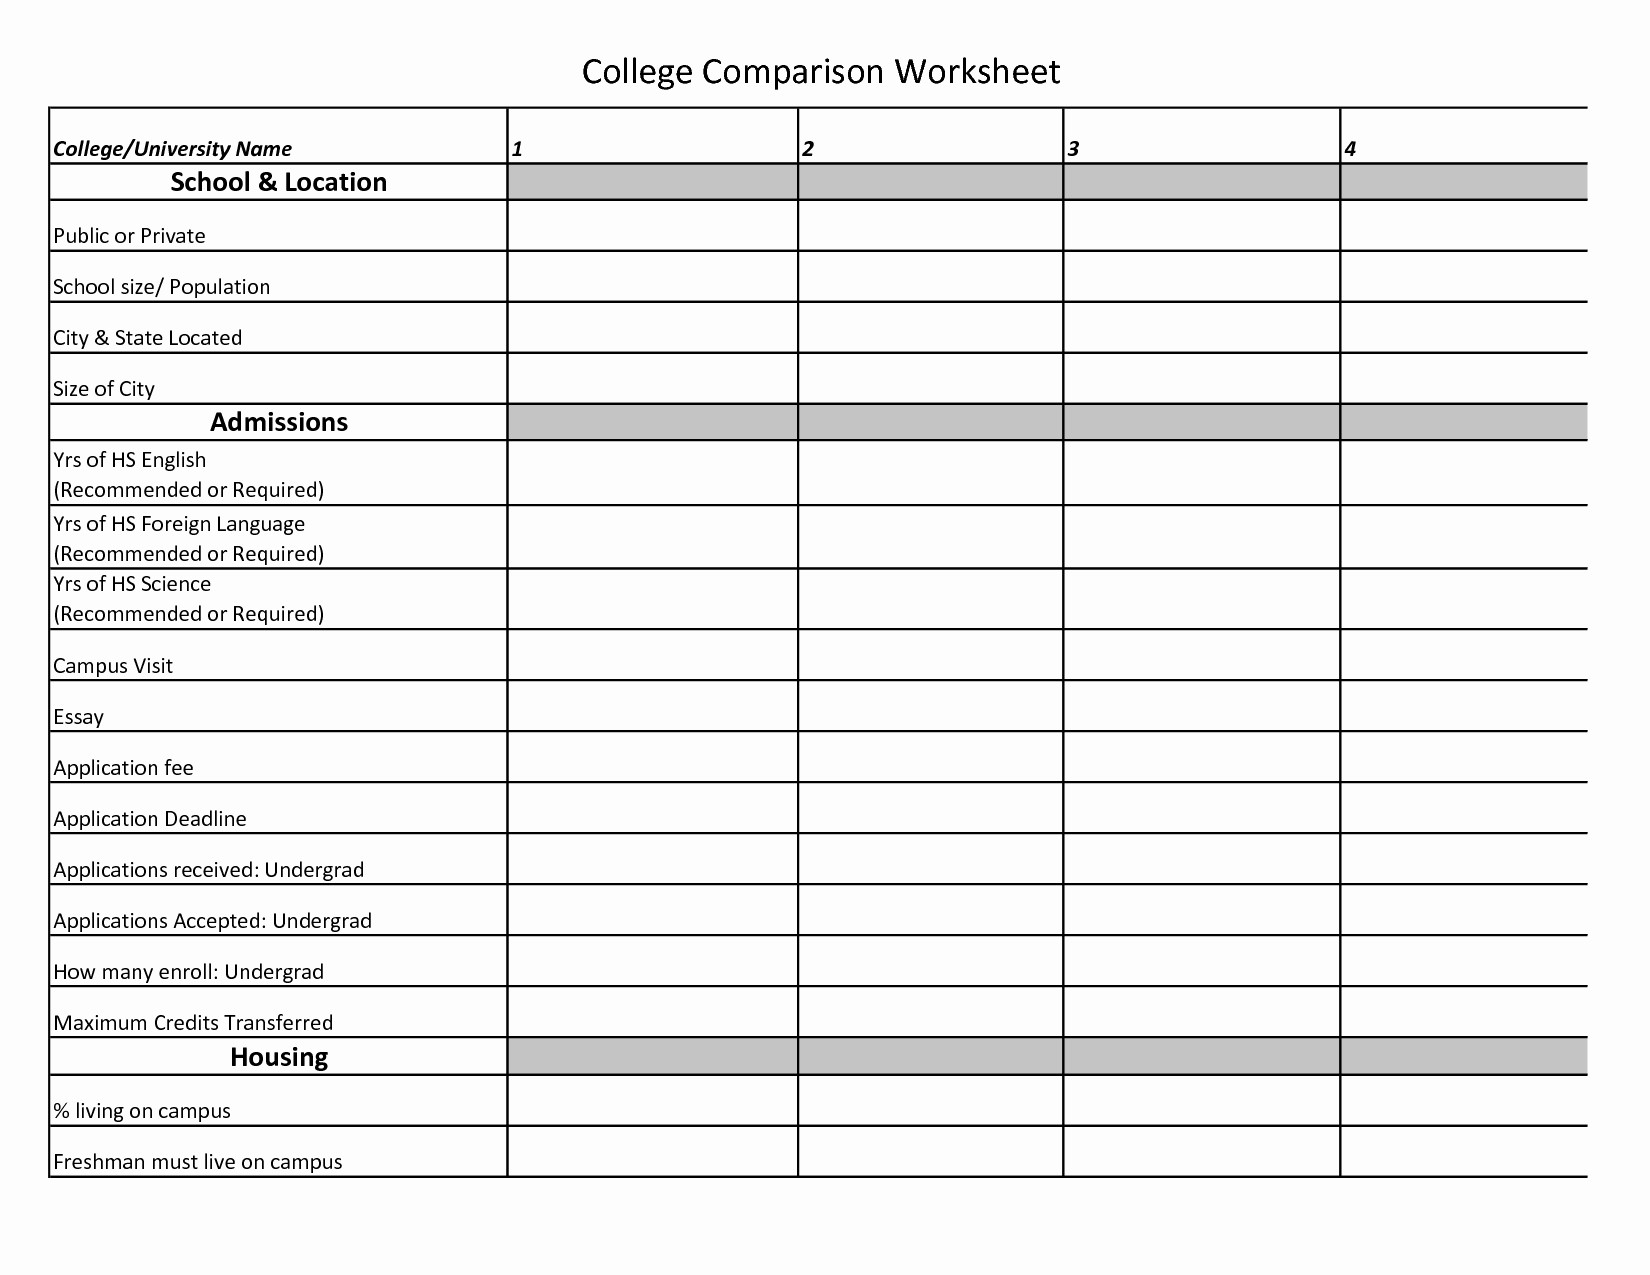 College Comparison Worksheet Template Lovely Cost Parison